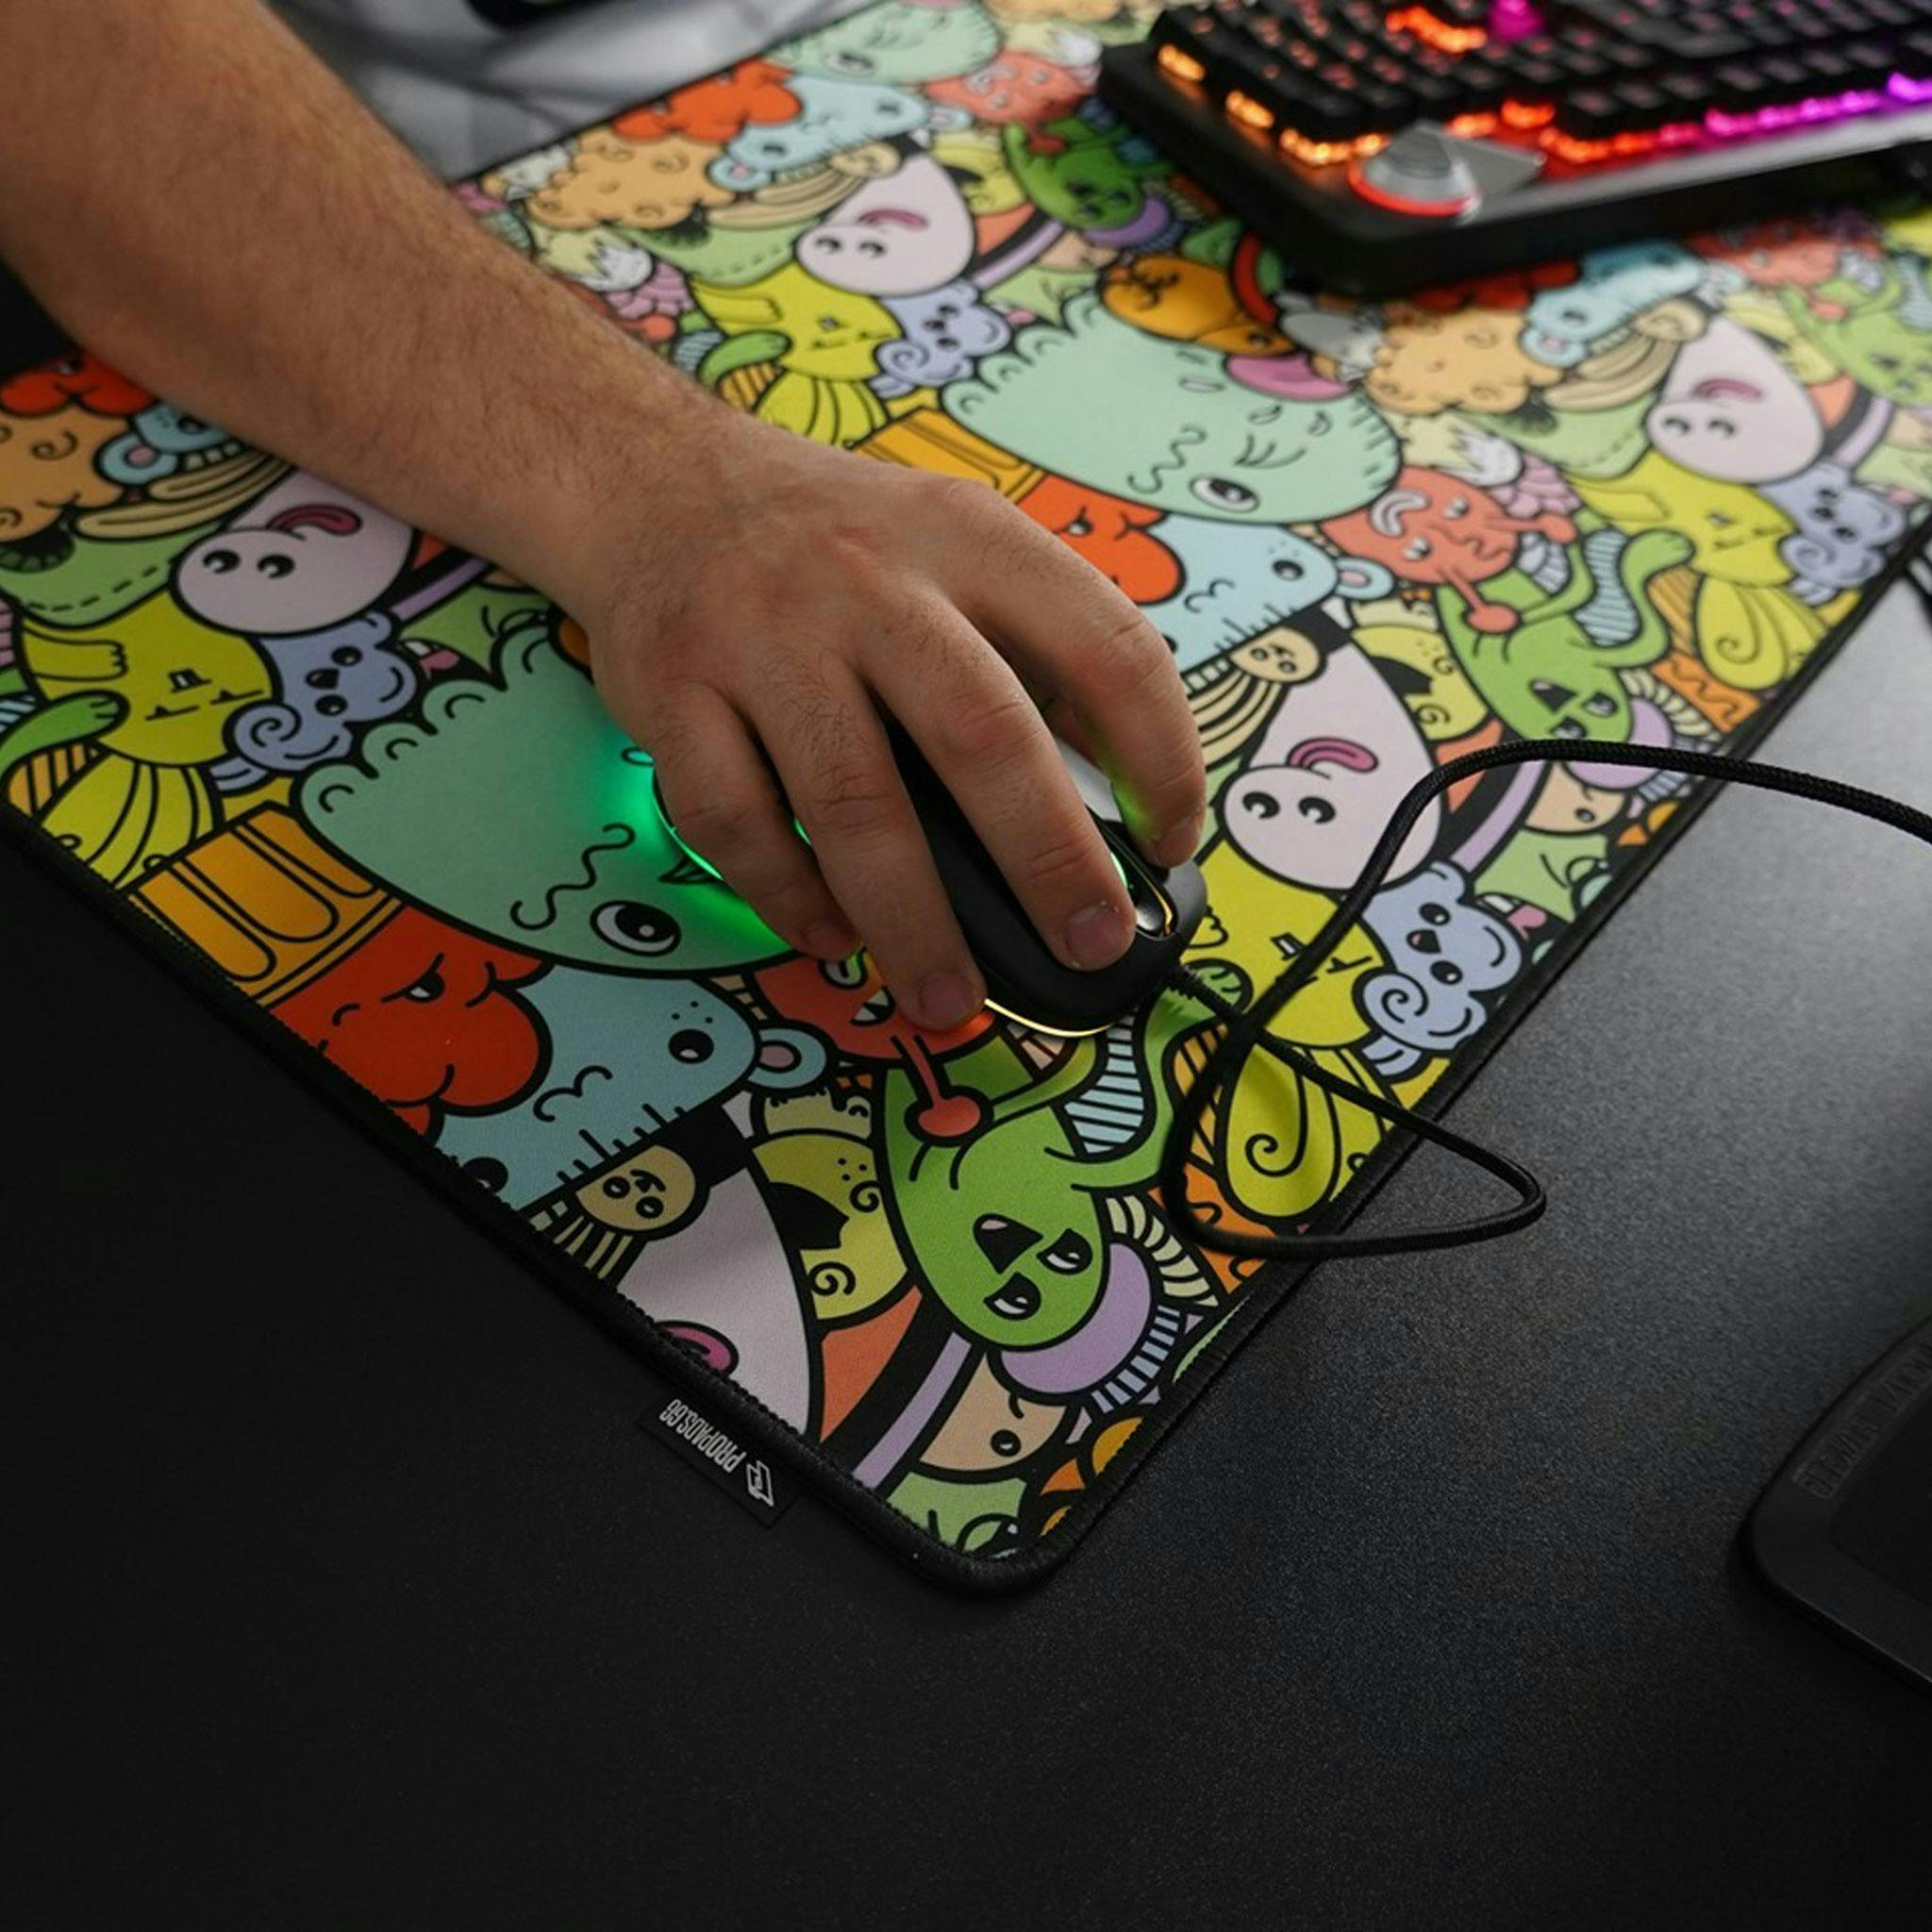 Customizable mousepads for Gaming from Propads in cooperation with Leetdesk